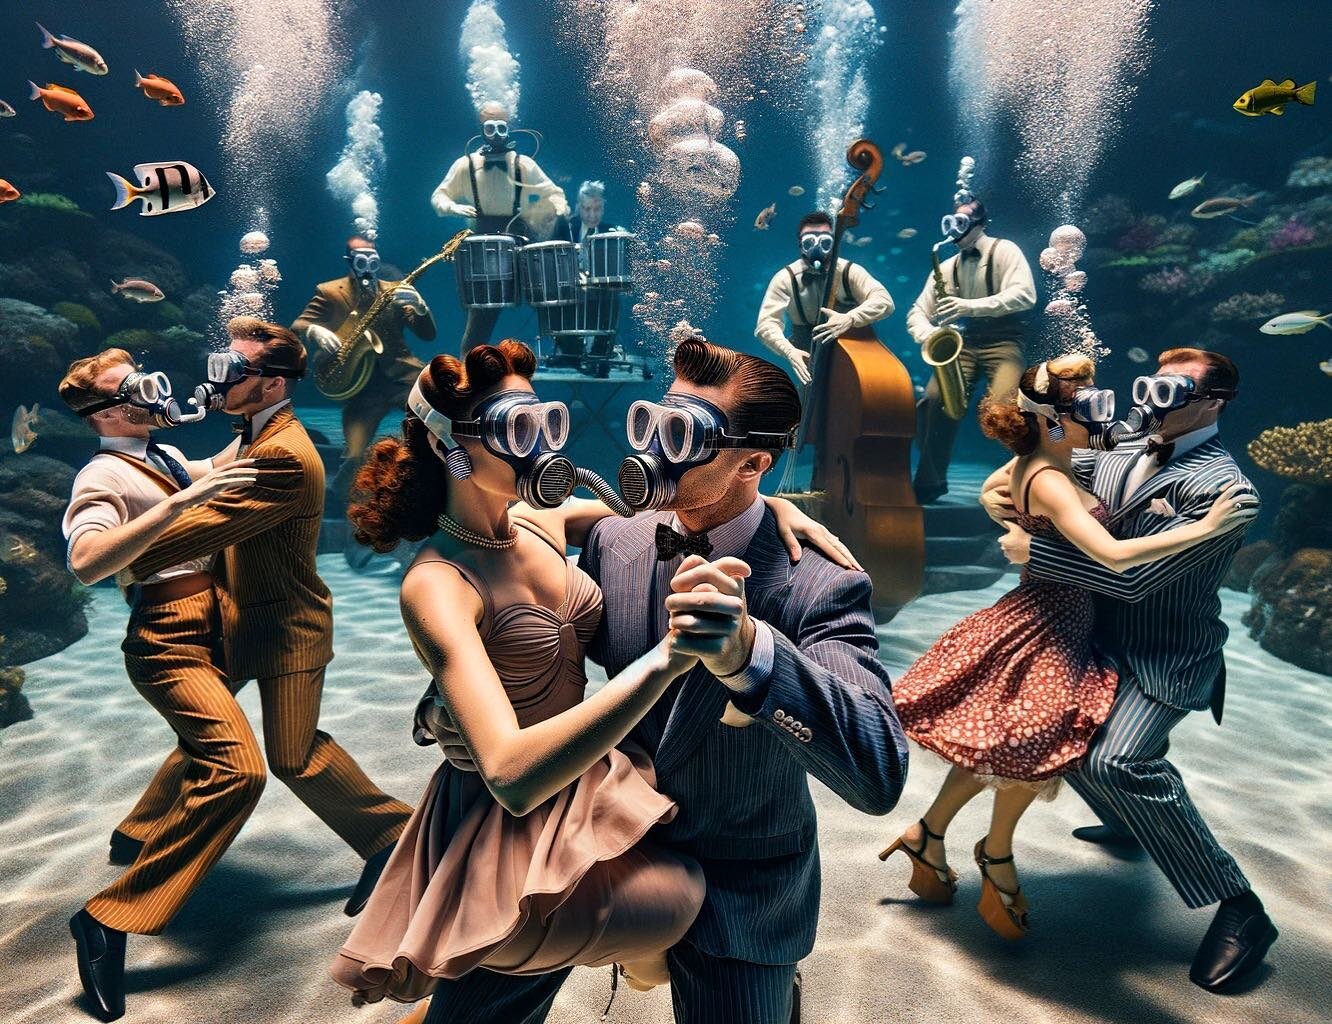 Take the plunge and immerse yourself in the most bewildering dance experiment of the year, with Shag Pile&rsquo;s &lsquo;Enchantment Under the Sea&rsquo; dance. Dive in for a night of swing dances several feet underwater. 

Yes, you heard right. It&r